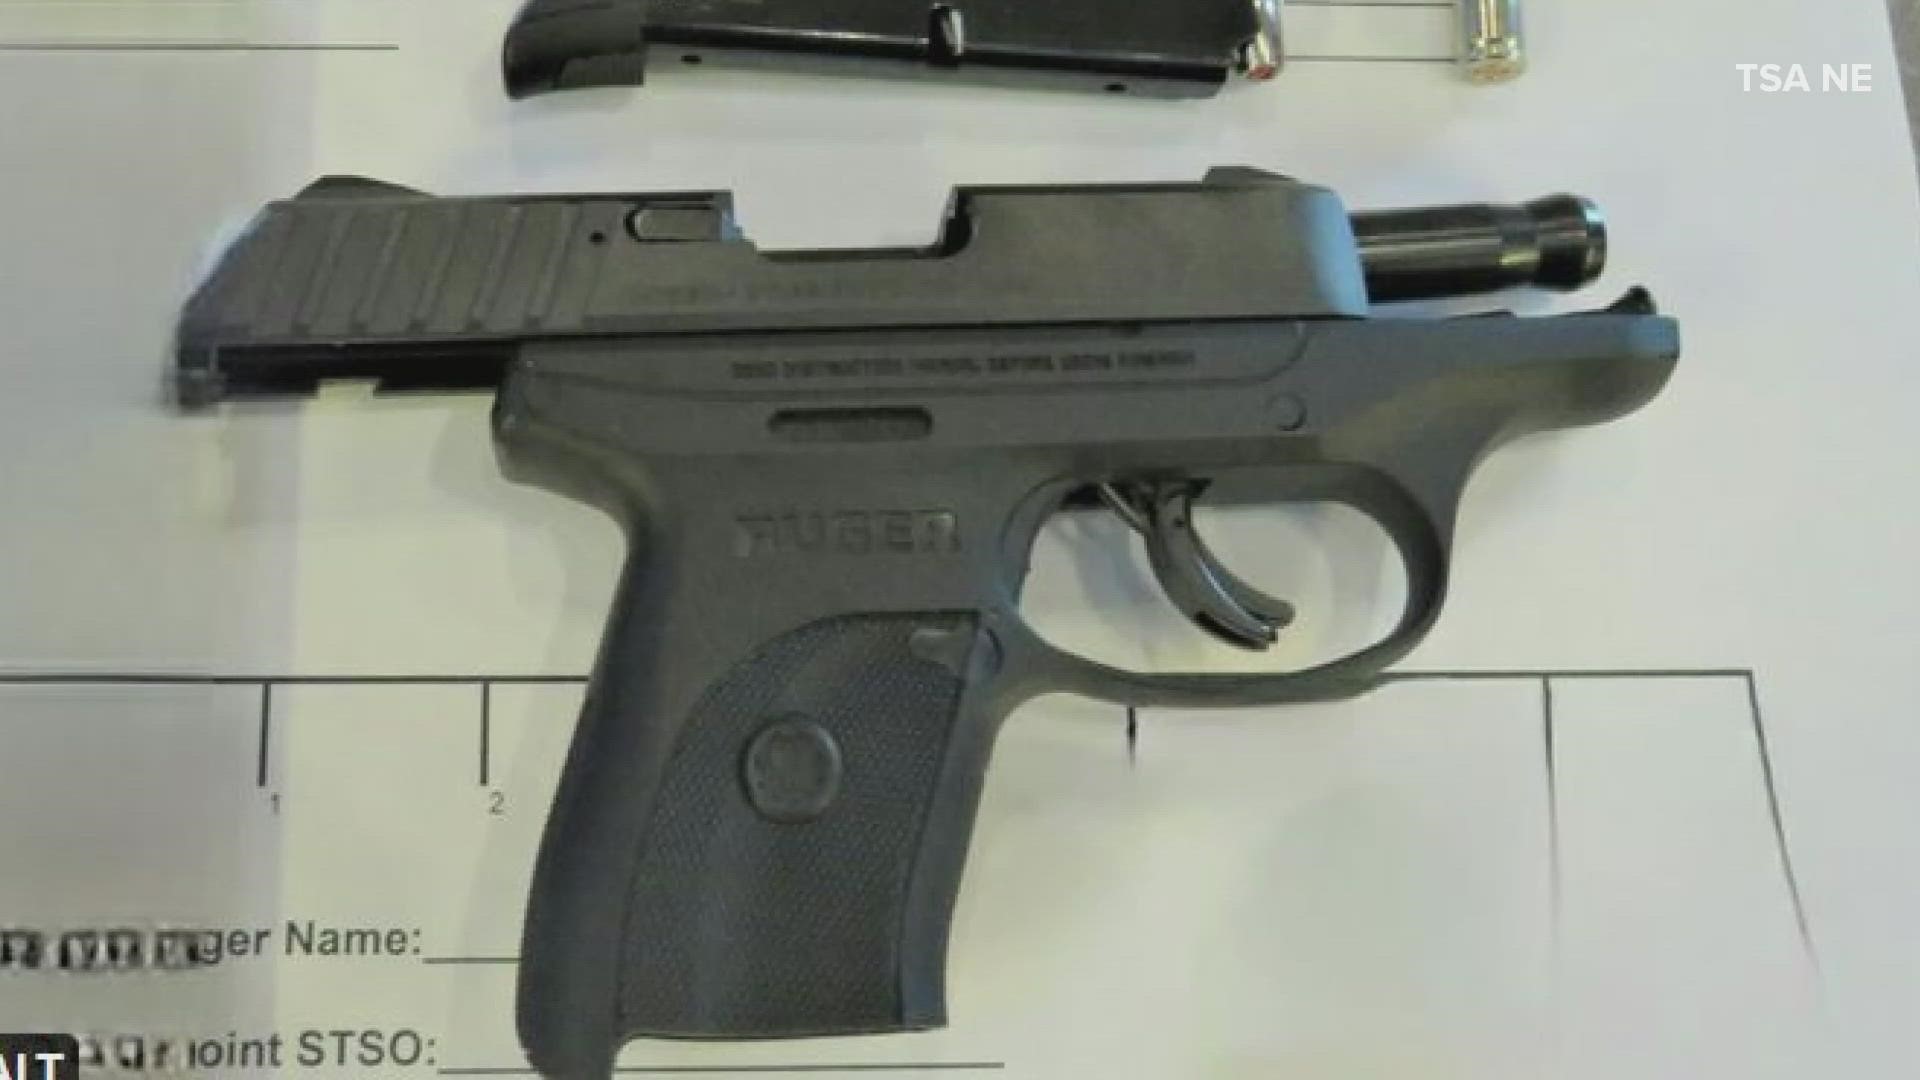 The Transportation Security Administration in New England said this gun was the first detected at the jetport in 2023 and the second intercepted in Maine this year.